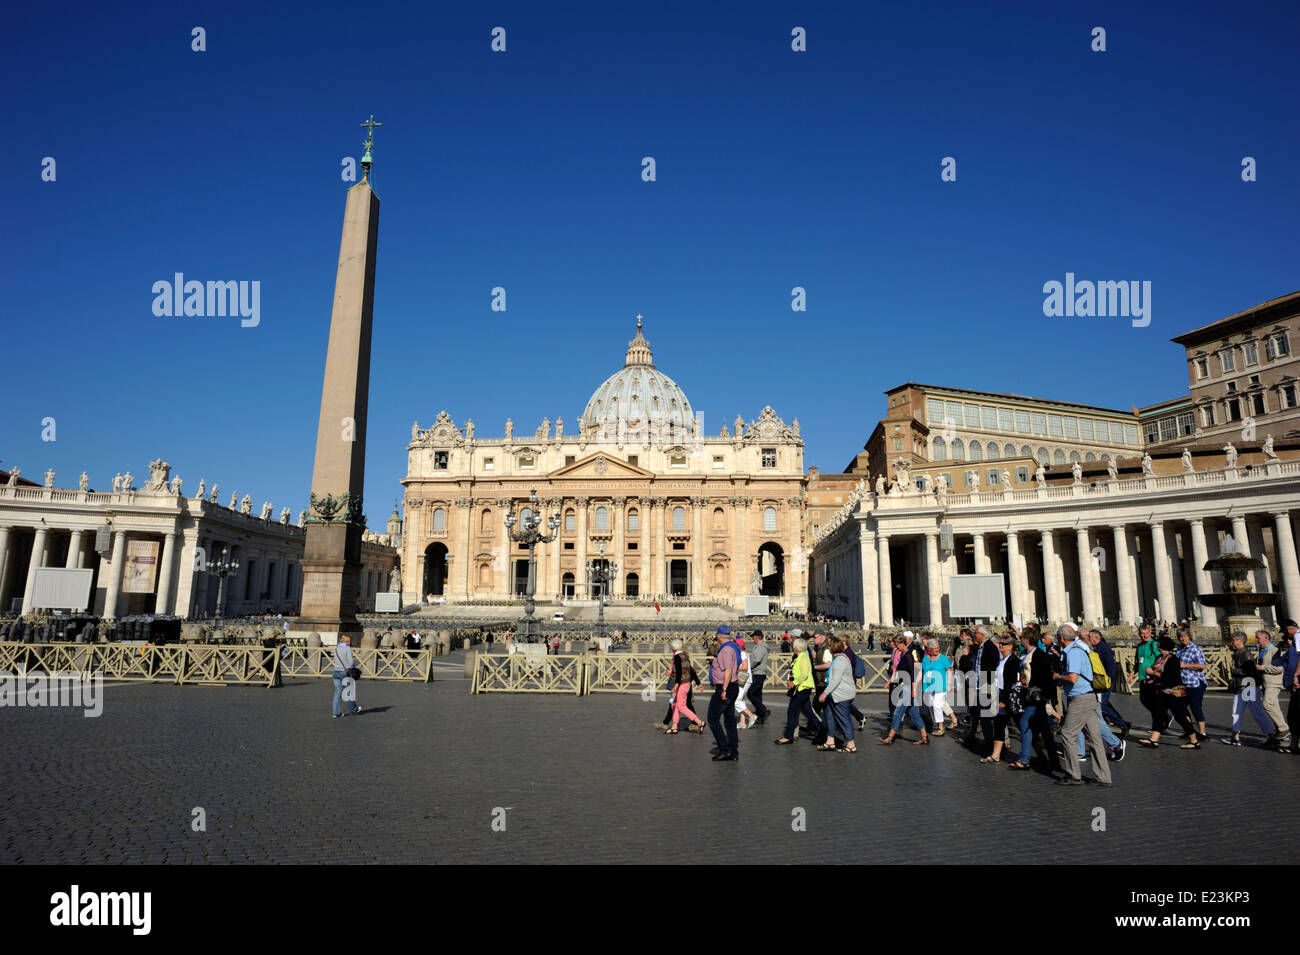 Italy, Rome, St Peter's square Stock Photo